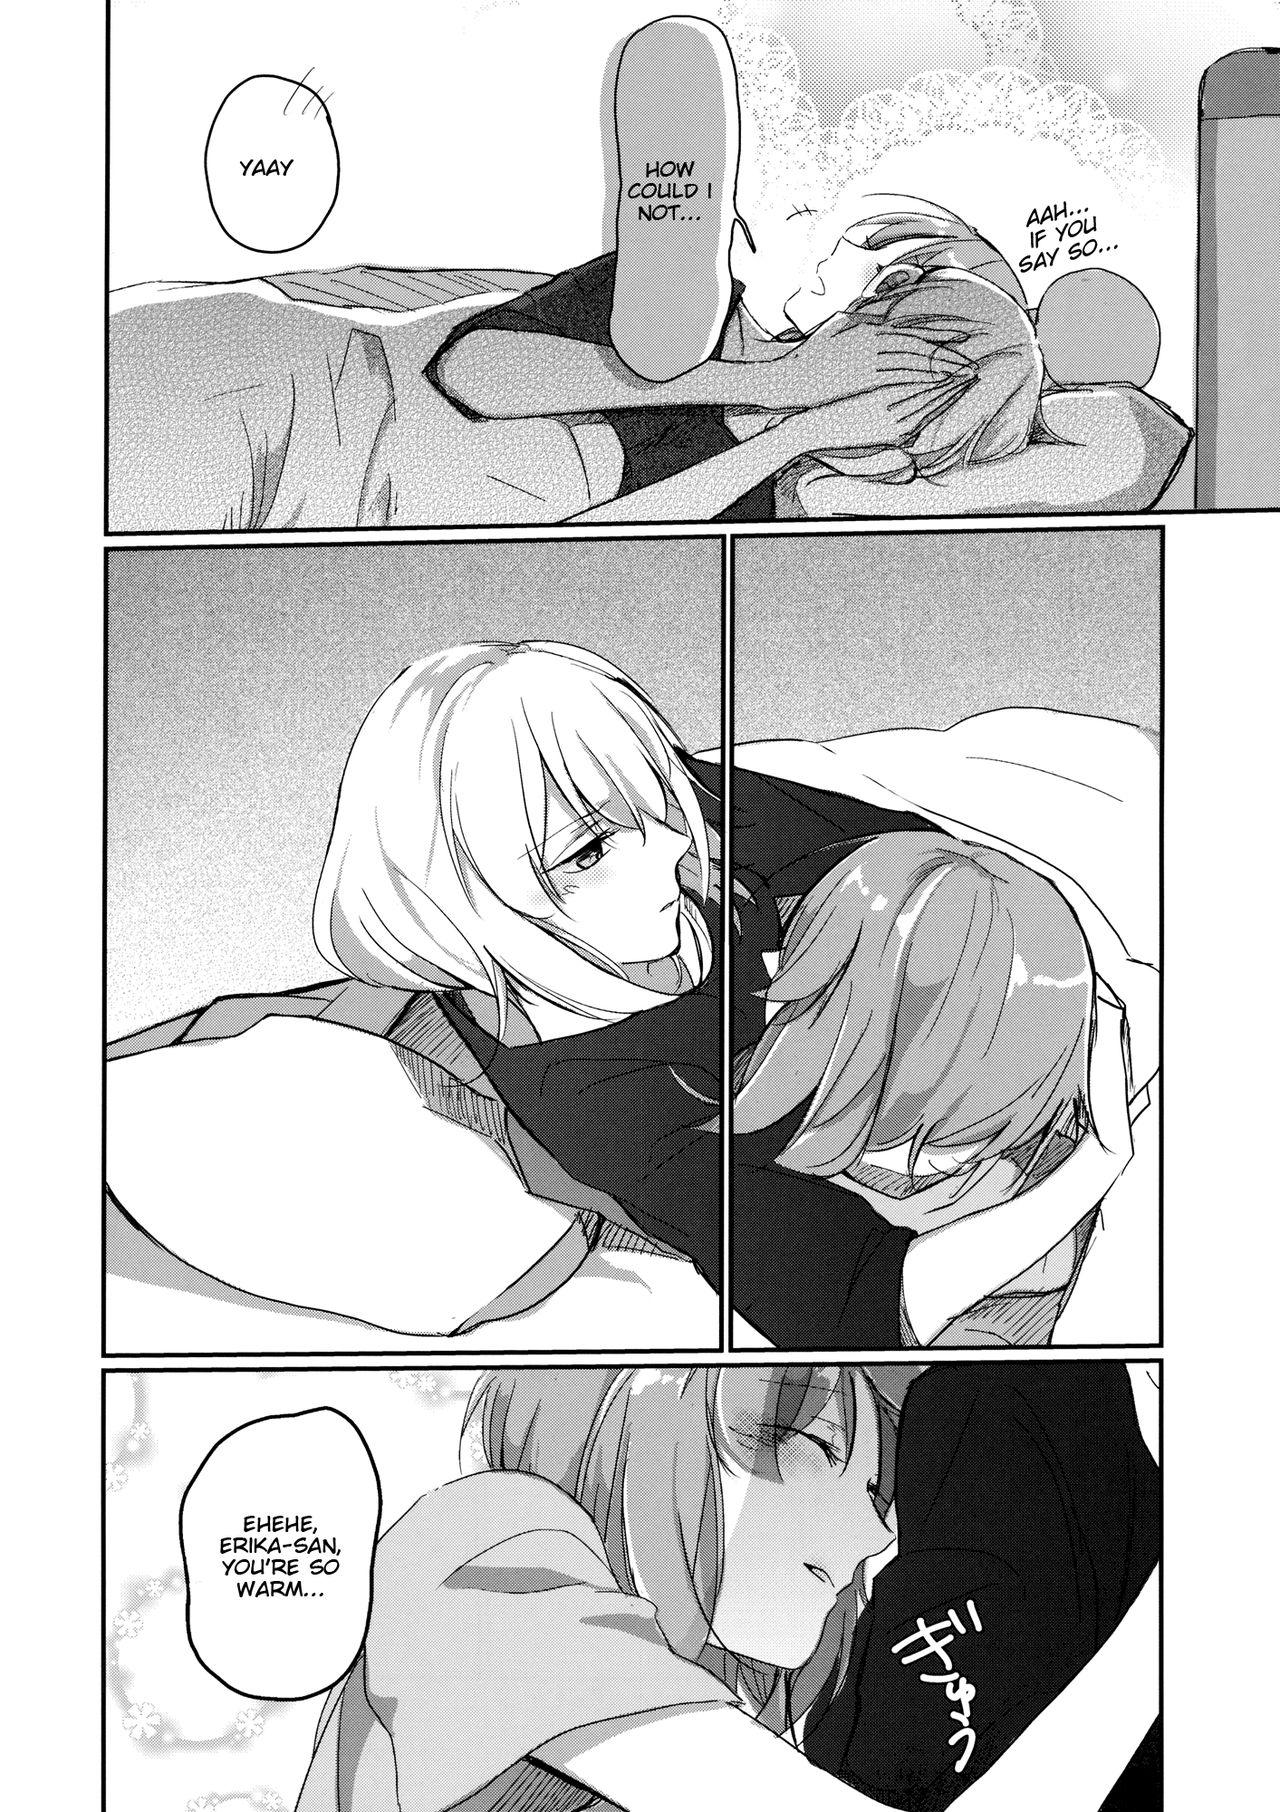 Leaked for the first time - Girls und panzer Pareja - Page 9